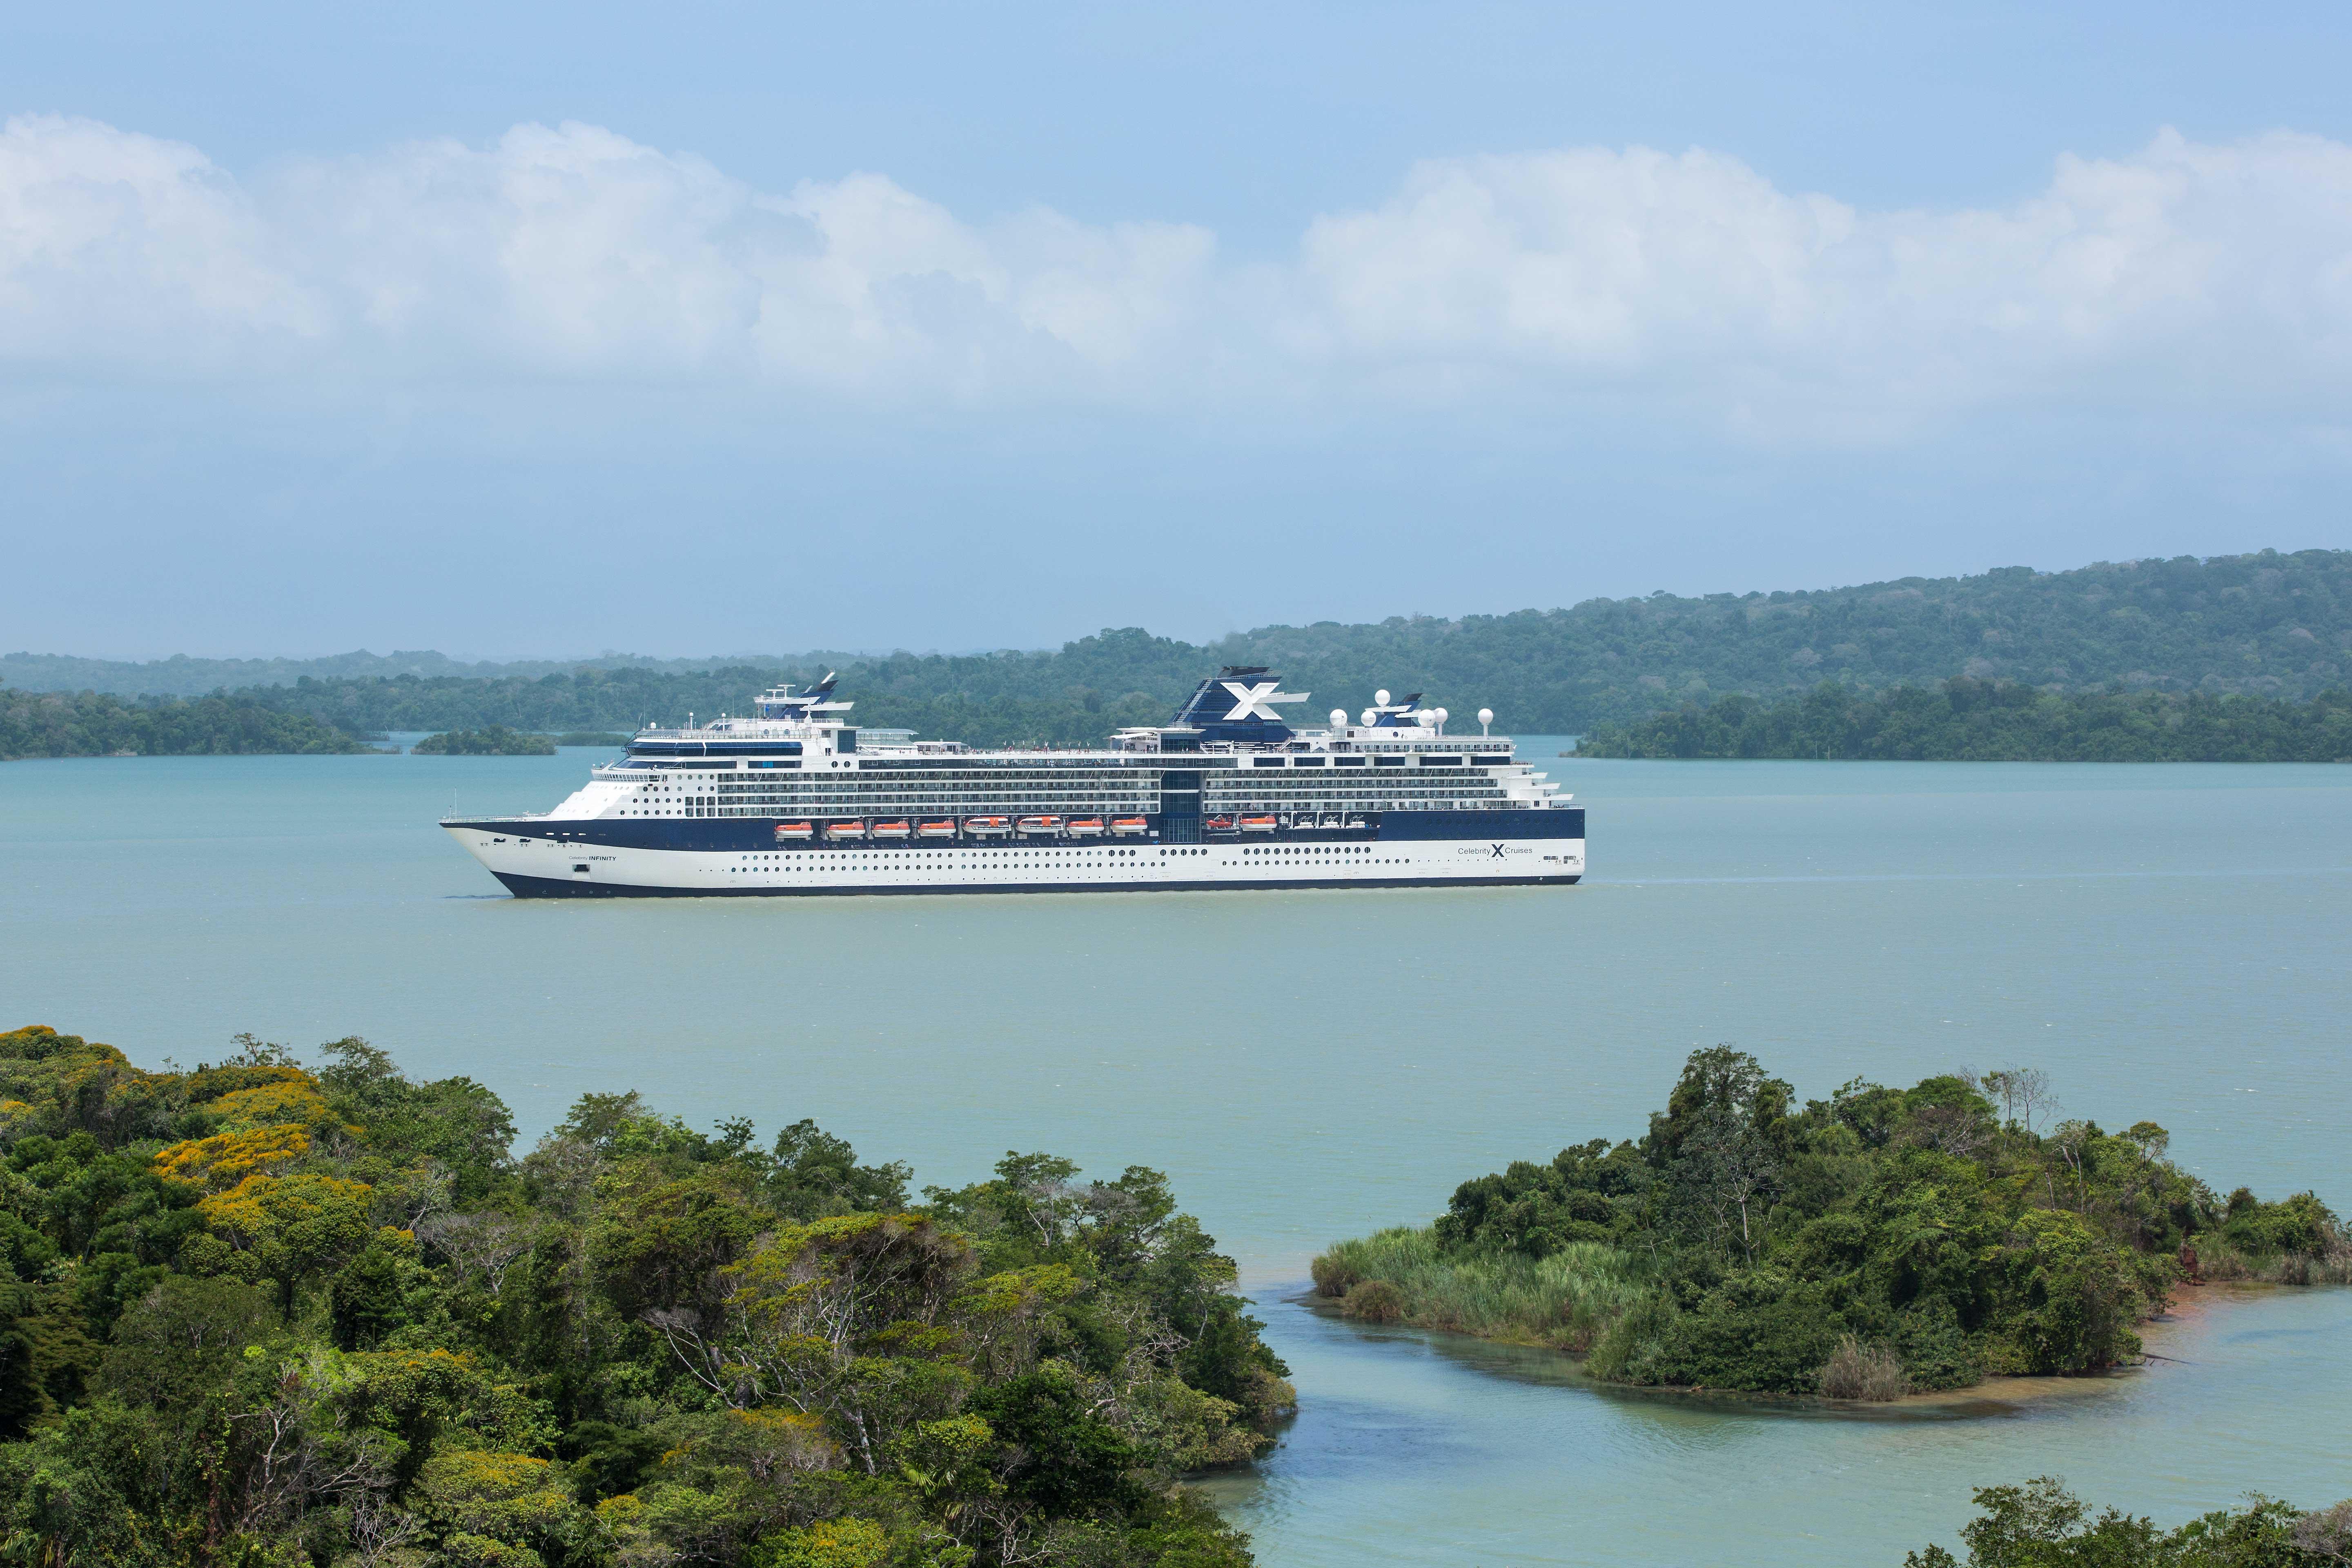 Traverse tropical waterways with stunning views on Central America cruises